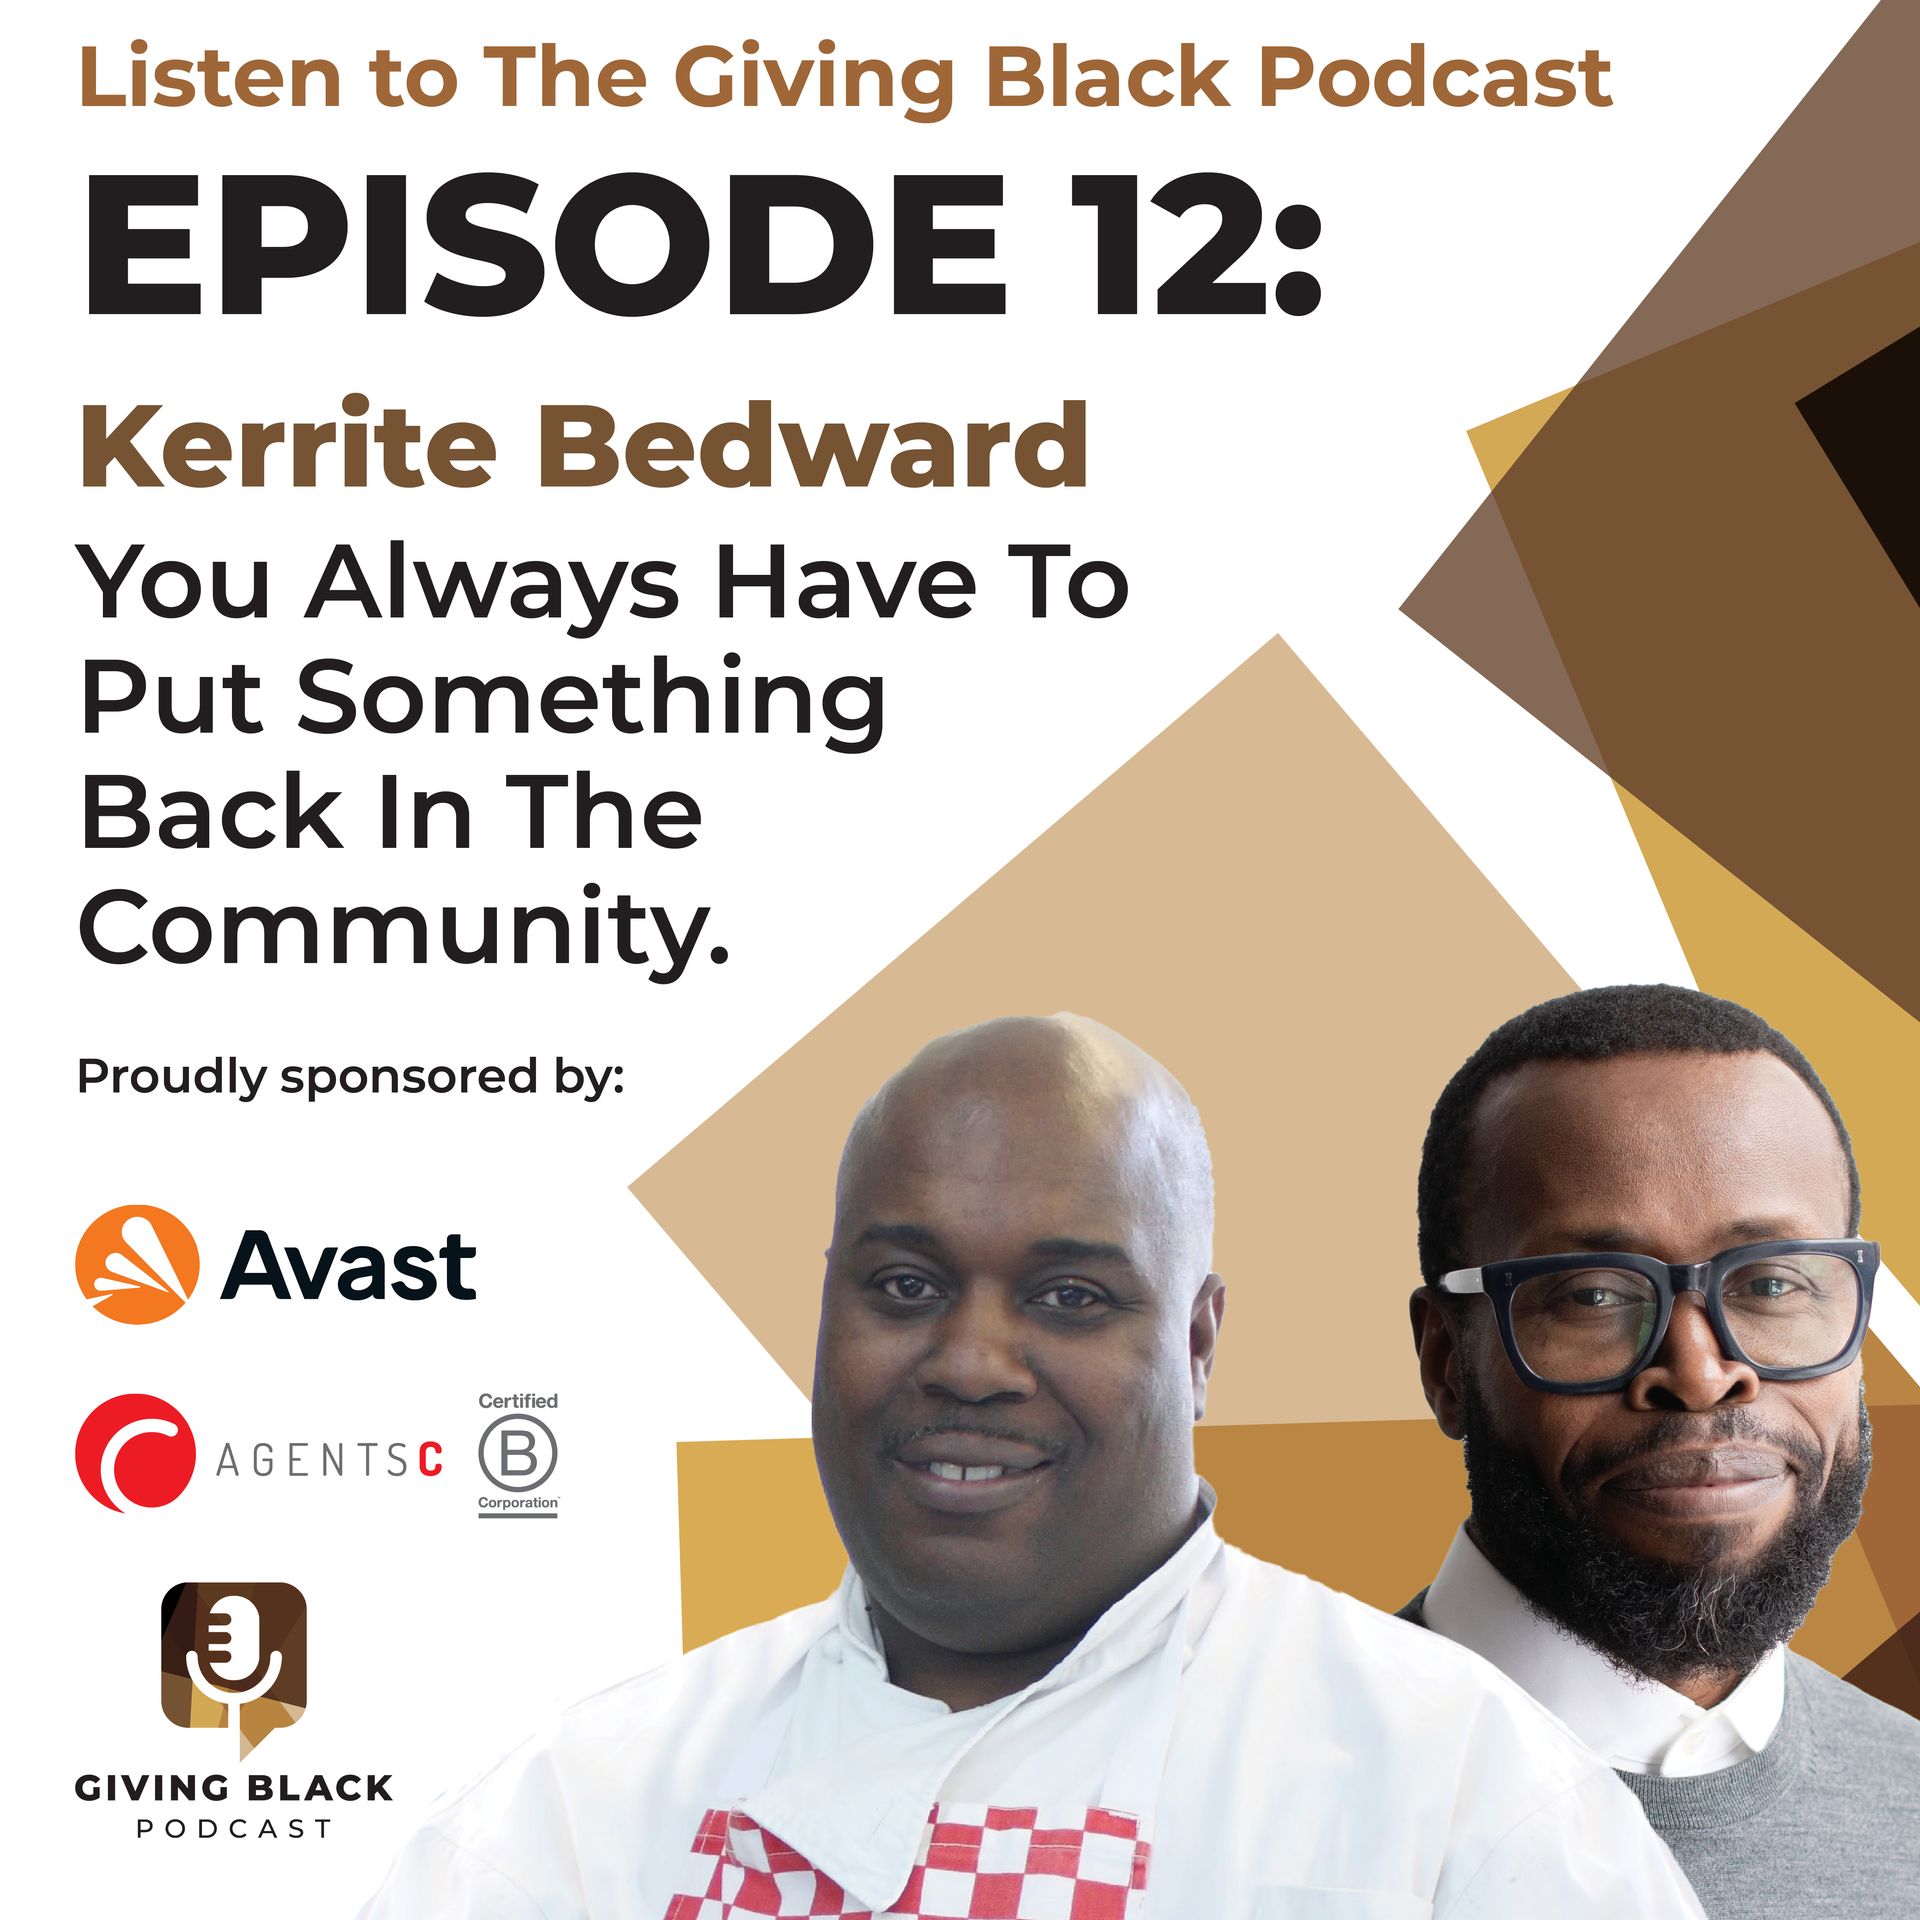 Episode 12: Kerrite Bedward: You Always Have To Put Something Back In The Community